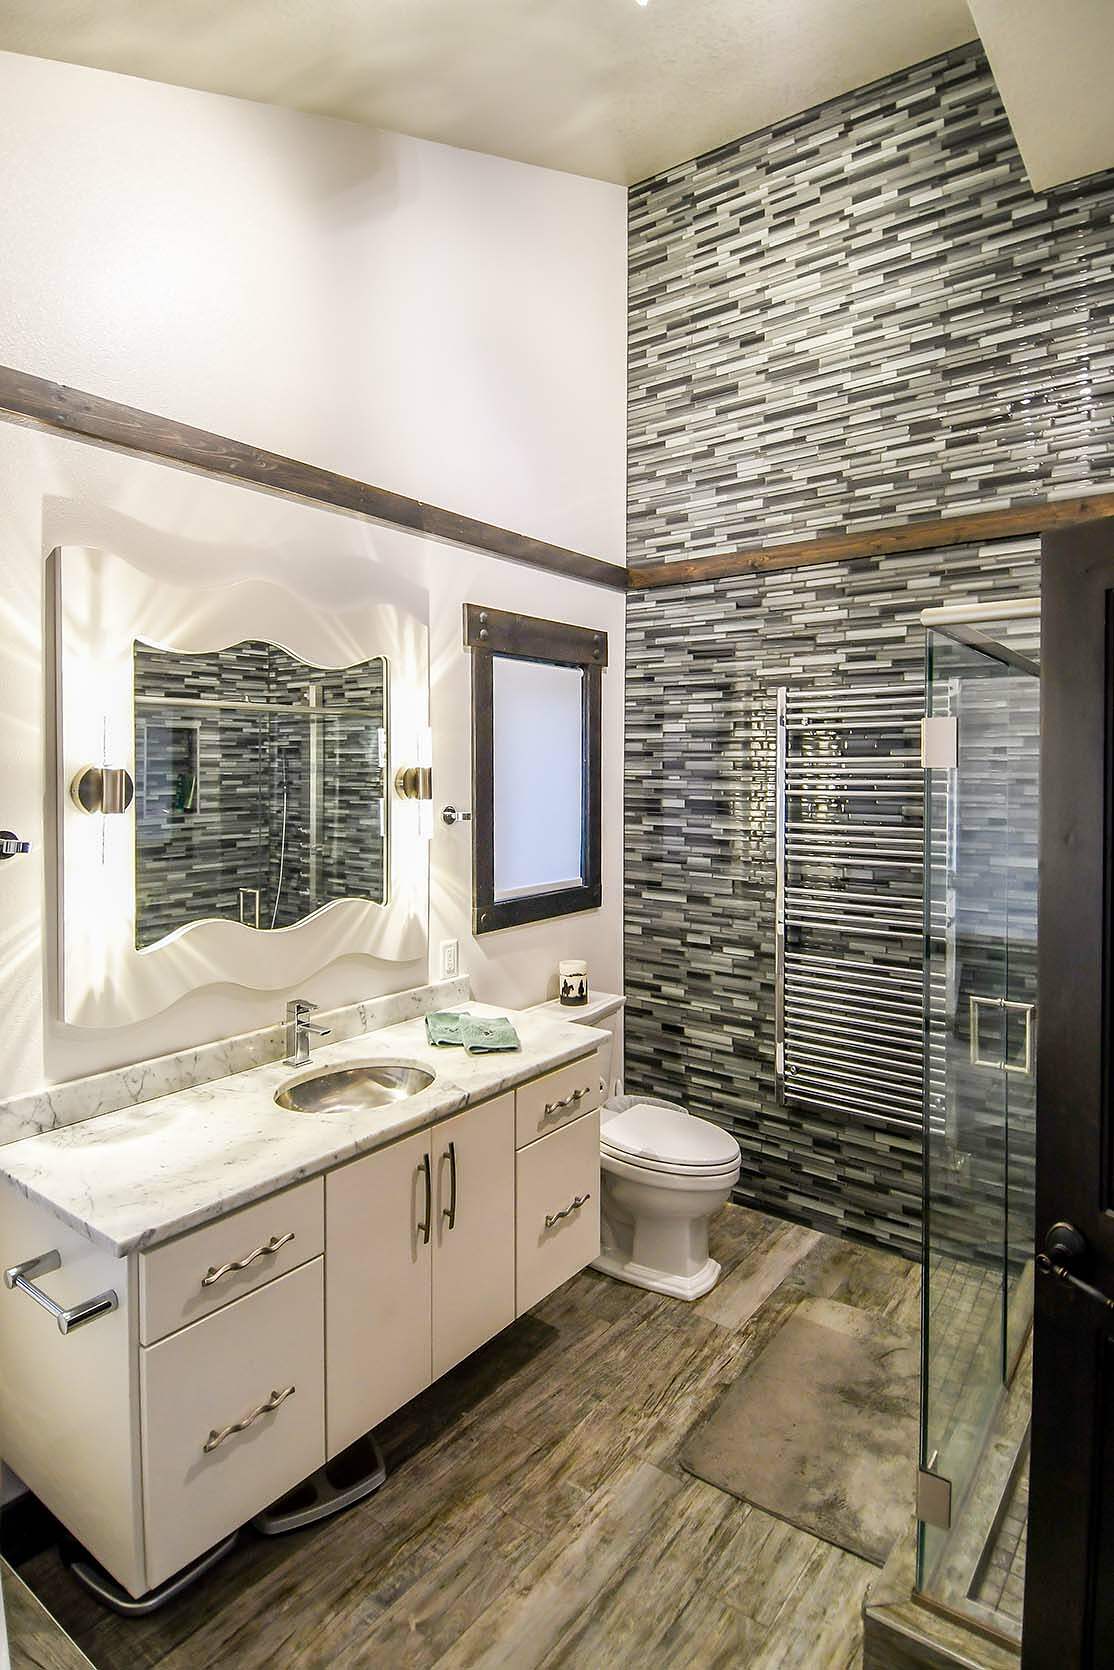 Modern bathroom interior featured in Lake & Home Magazine, March 2021, showcasing unique mirror shapes, a floating vanity with dual sinks, a textured gray accent wall, a glass-enclosed shower,